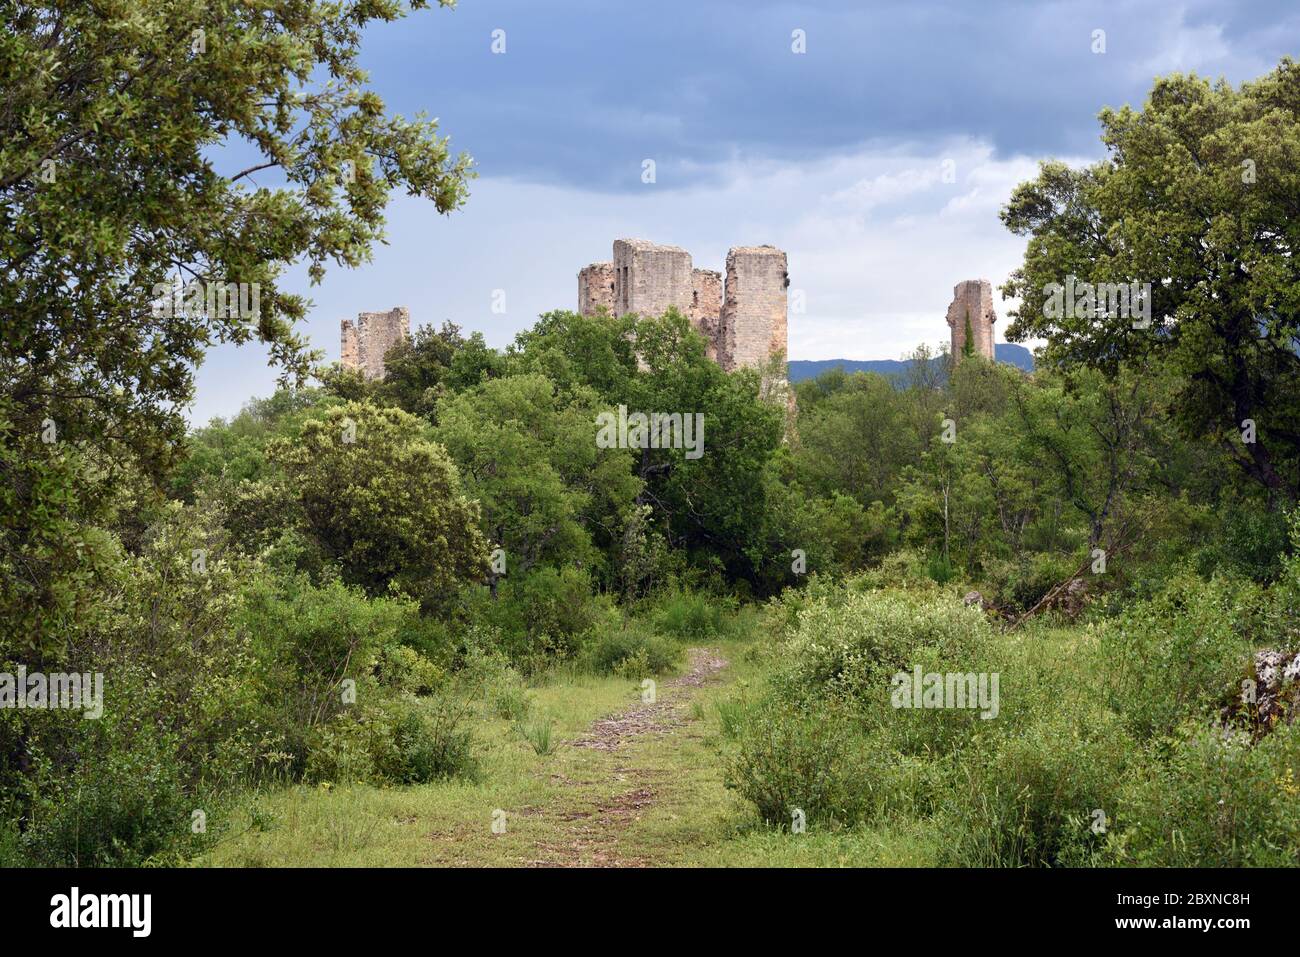 Ruined Brick Towers Rising Above Overgrown Grounds & Vegetation of the Ruined Château de Valbelle Tourves Var Provence France Stock Photo